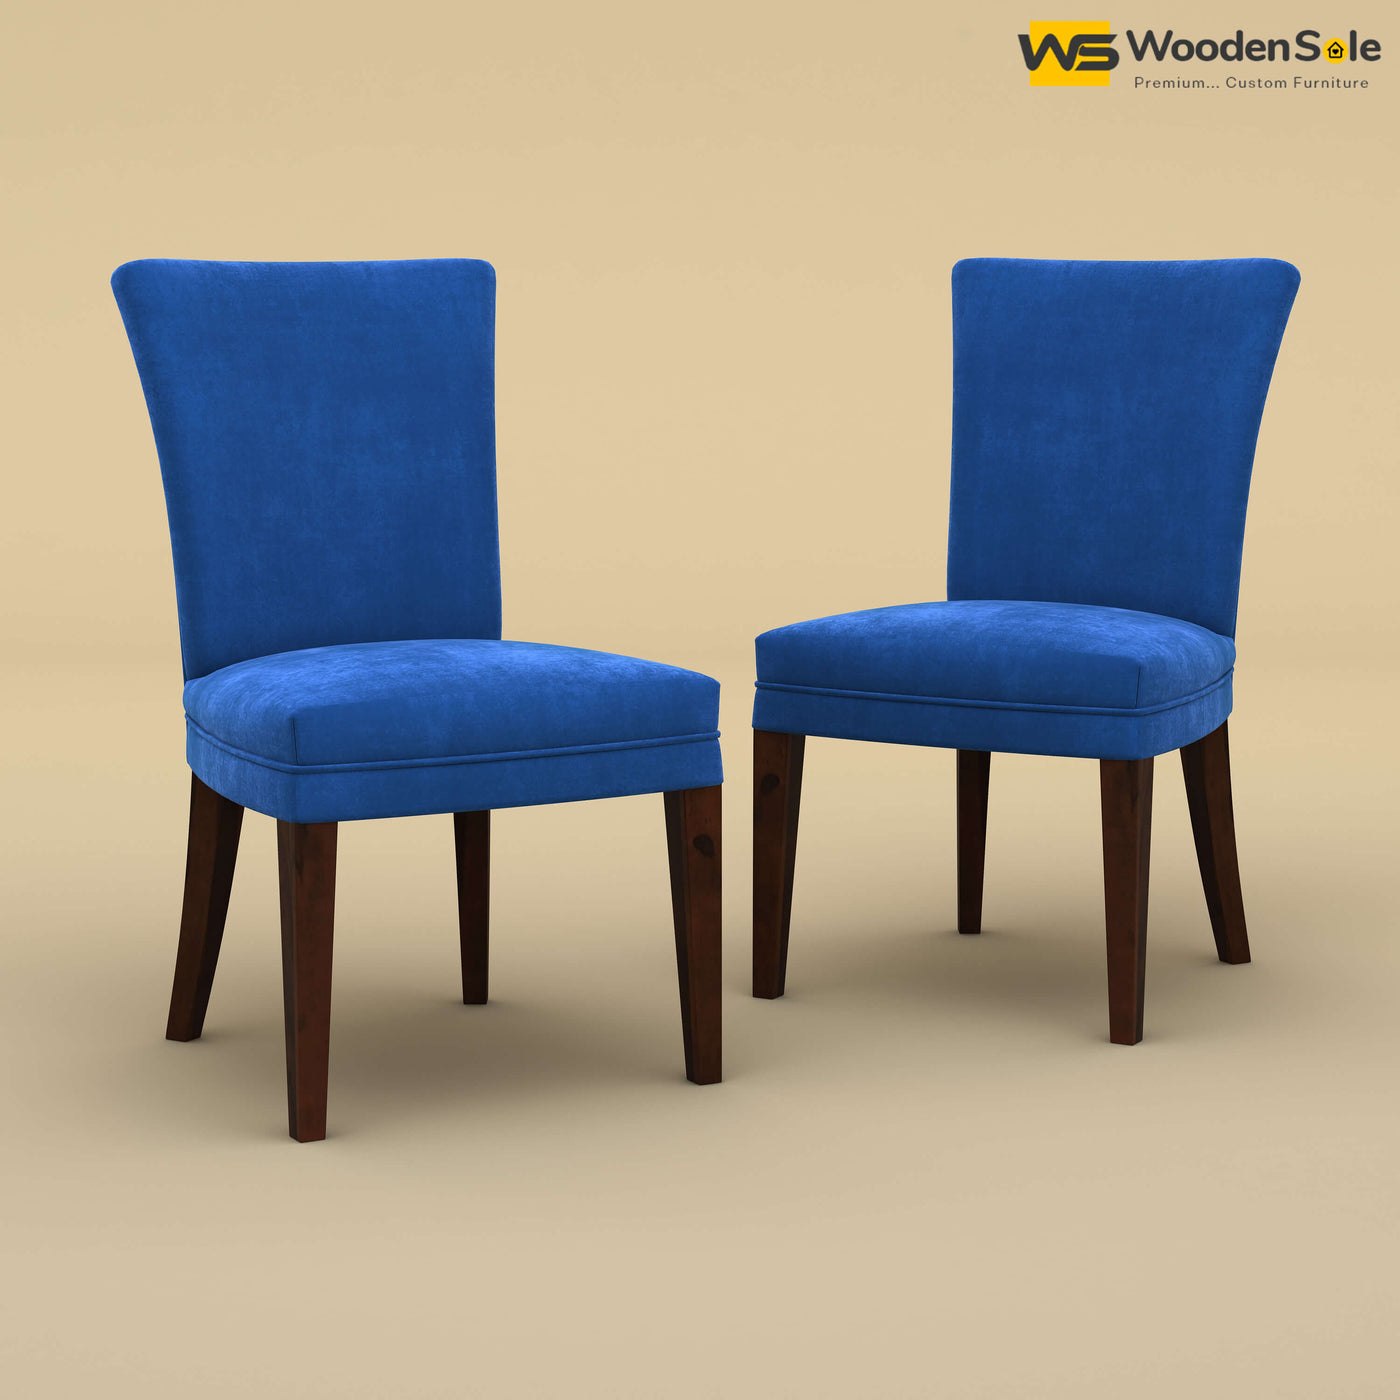 Bently Dining Chairs - Set of 2 (Velvet, Royal Blue)